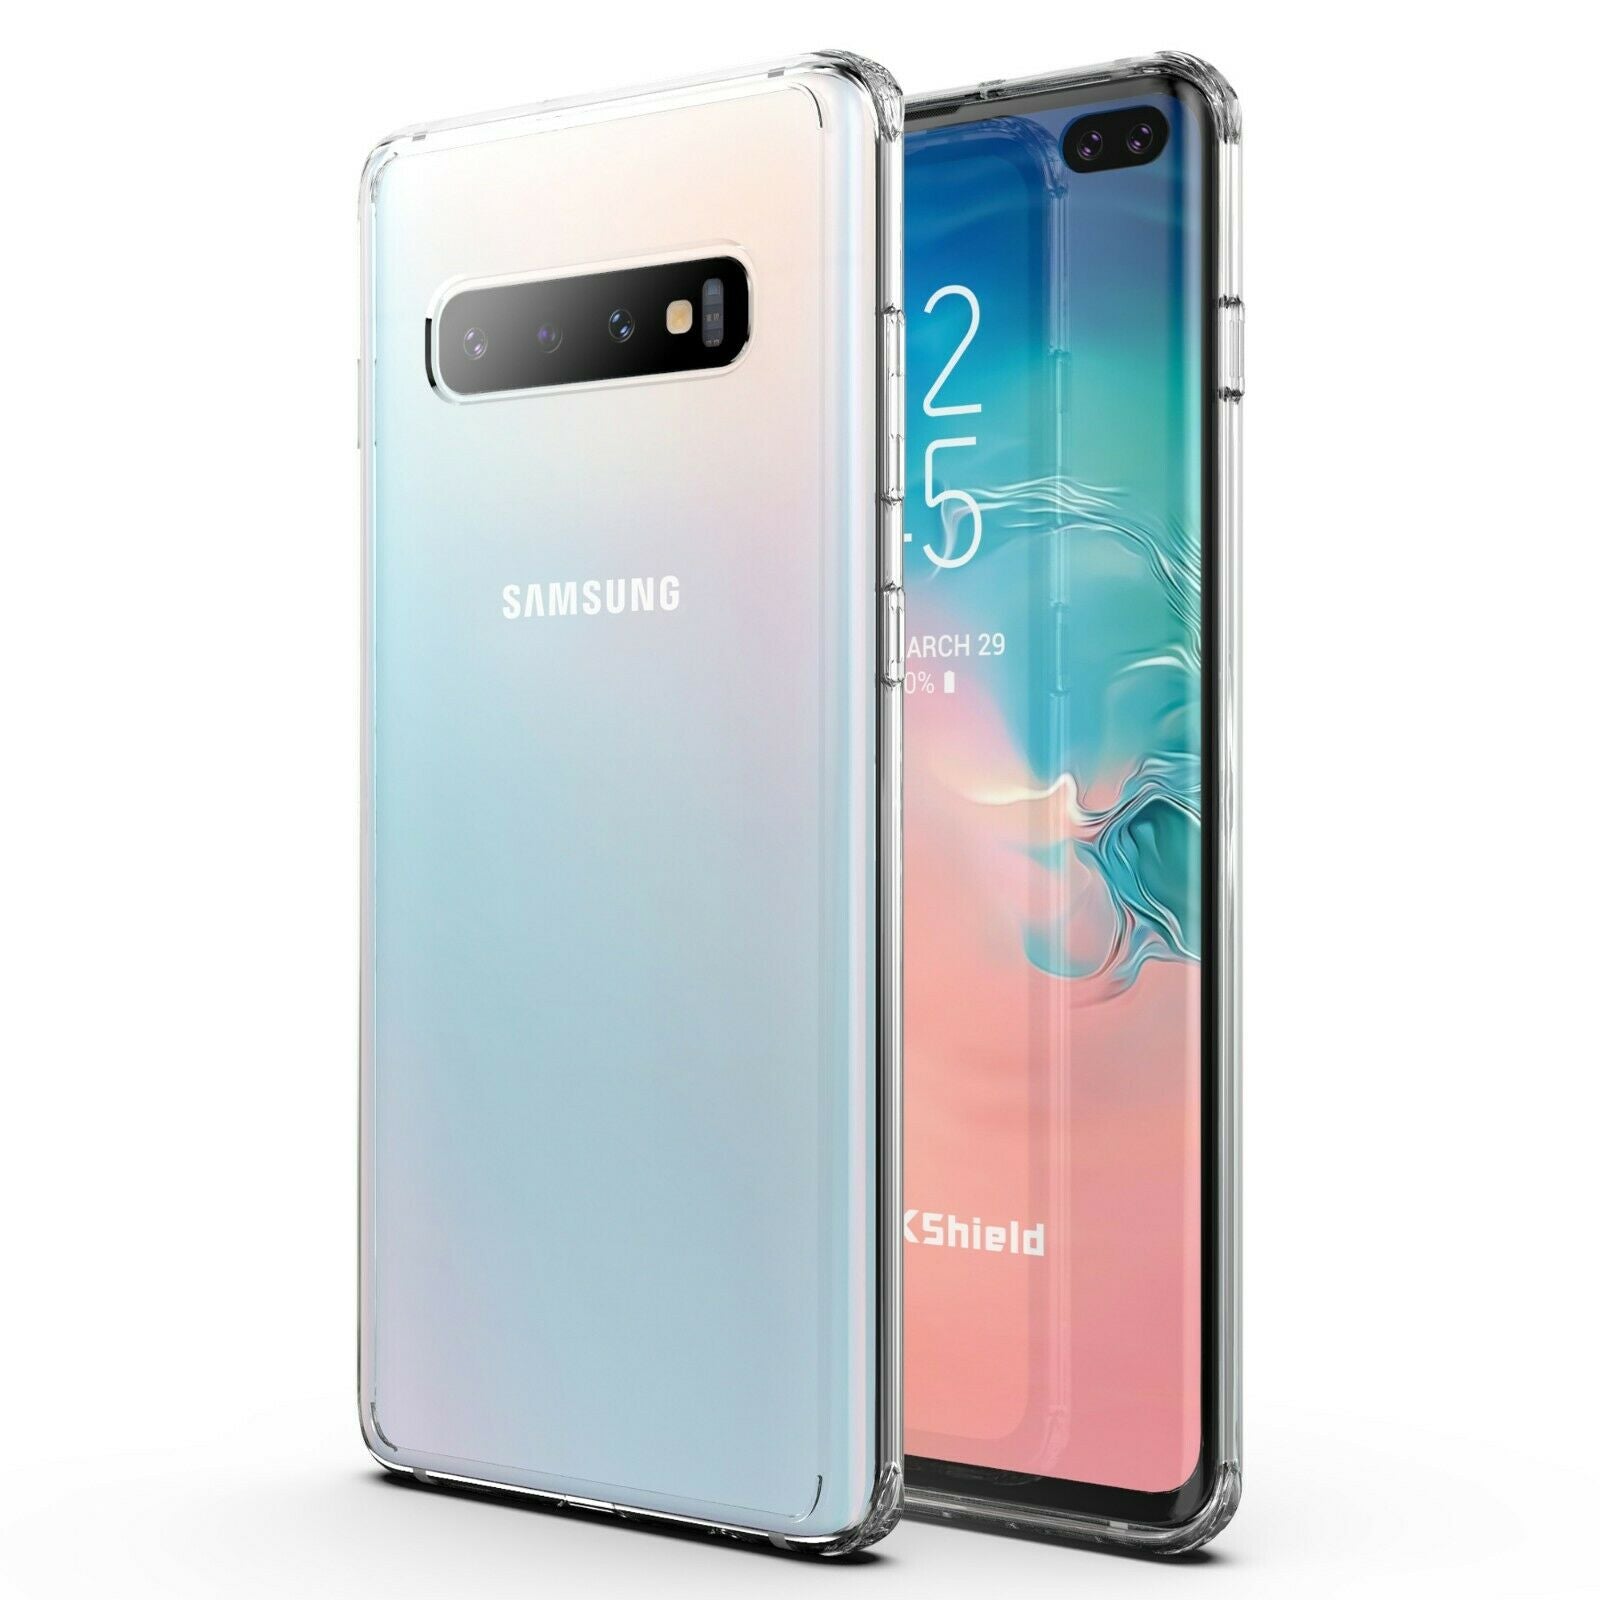 Samsung Galaxy S10 Plus Case Shockproof Crystal Bumper Case Cover